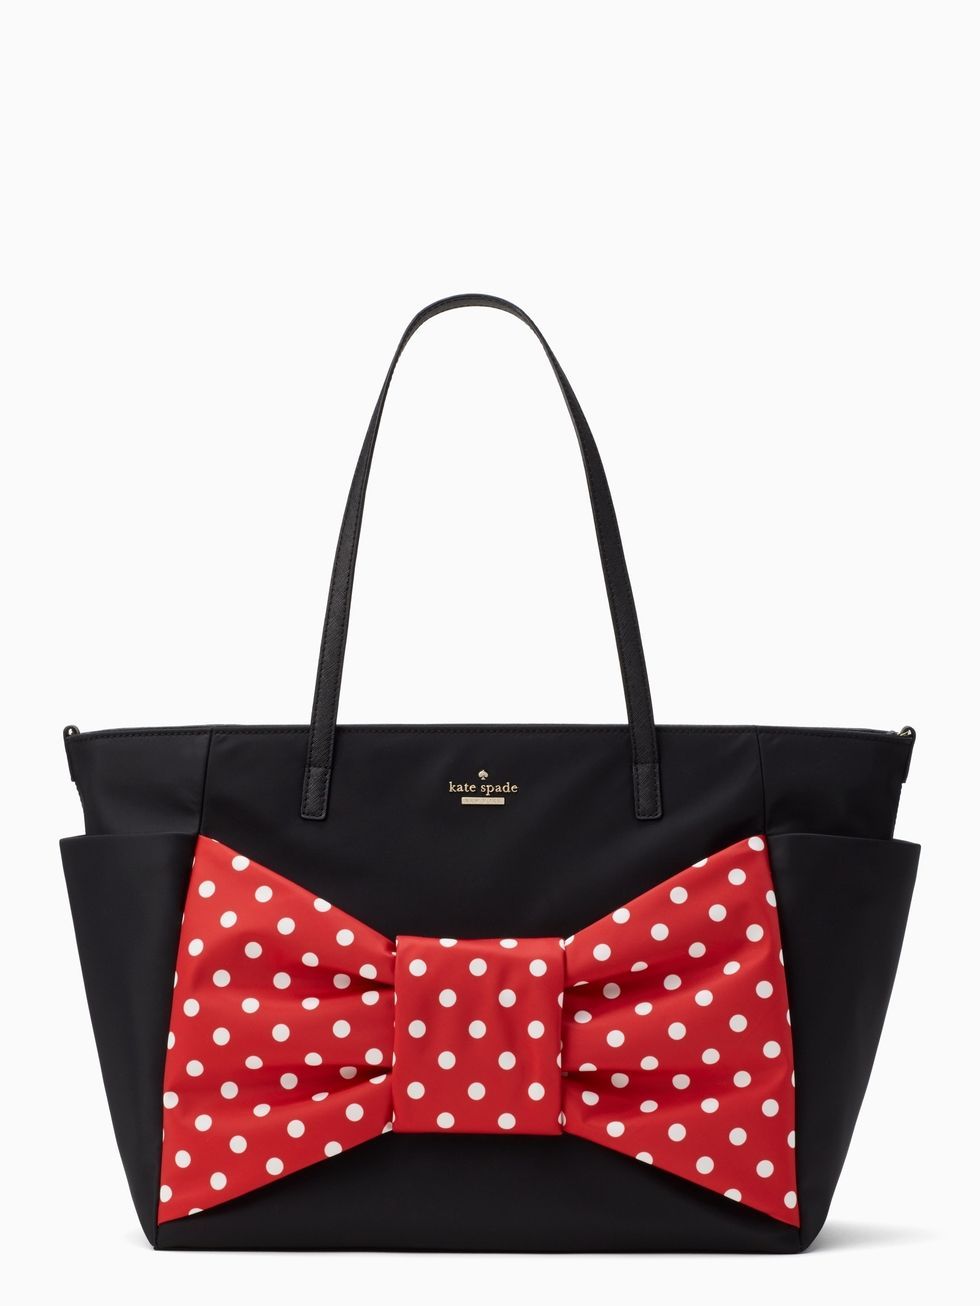 Minnie Mouse Collection by Kate Spade New York - MickeyBlog.com